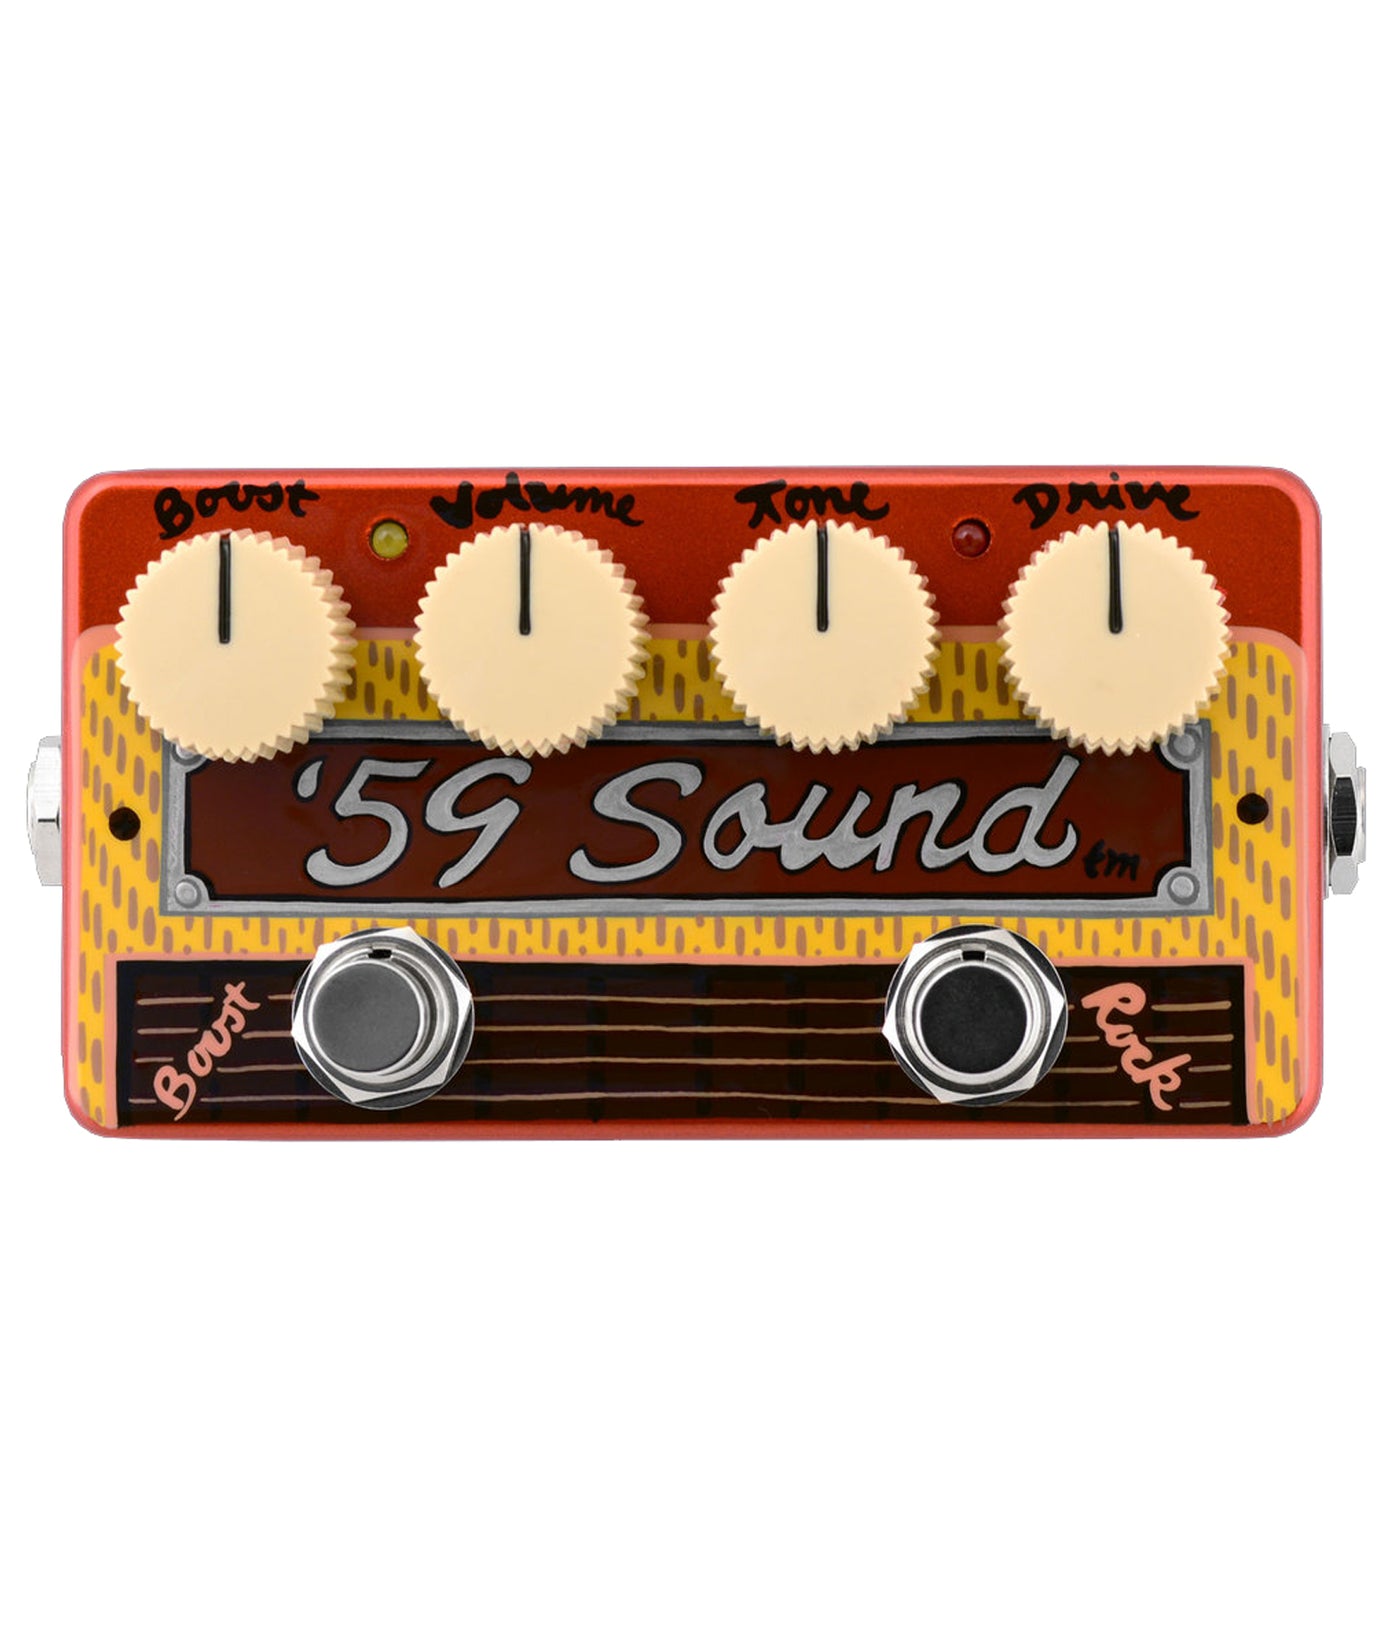 Zvex 59' Sound Hand-Painted Overdrive Pedal